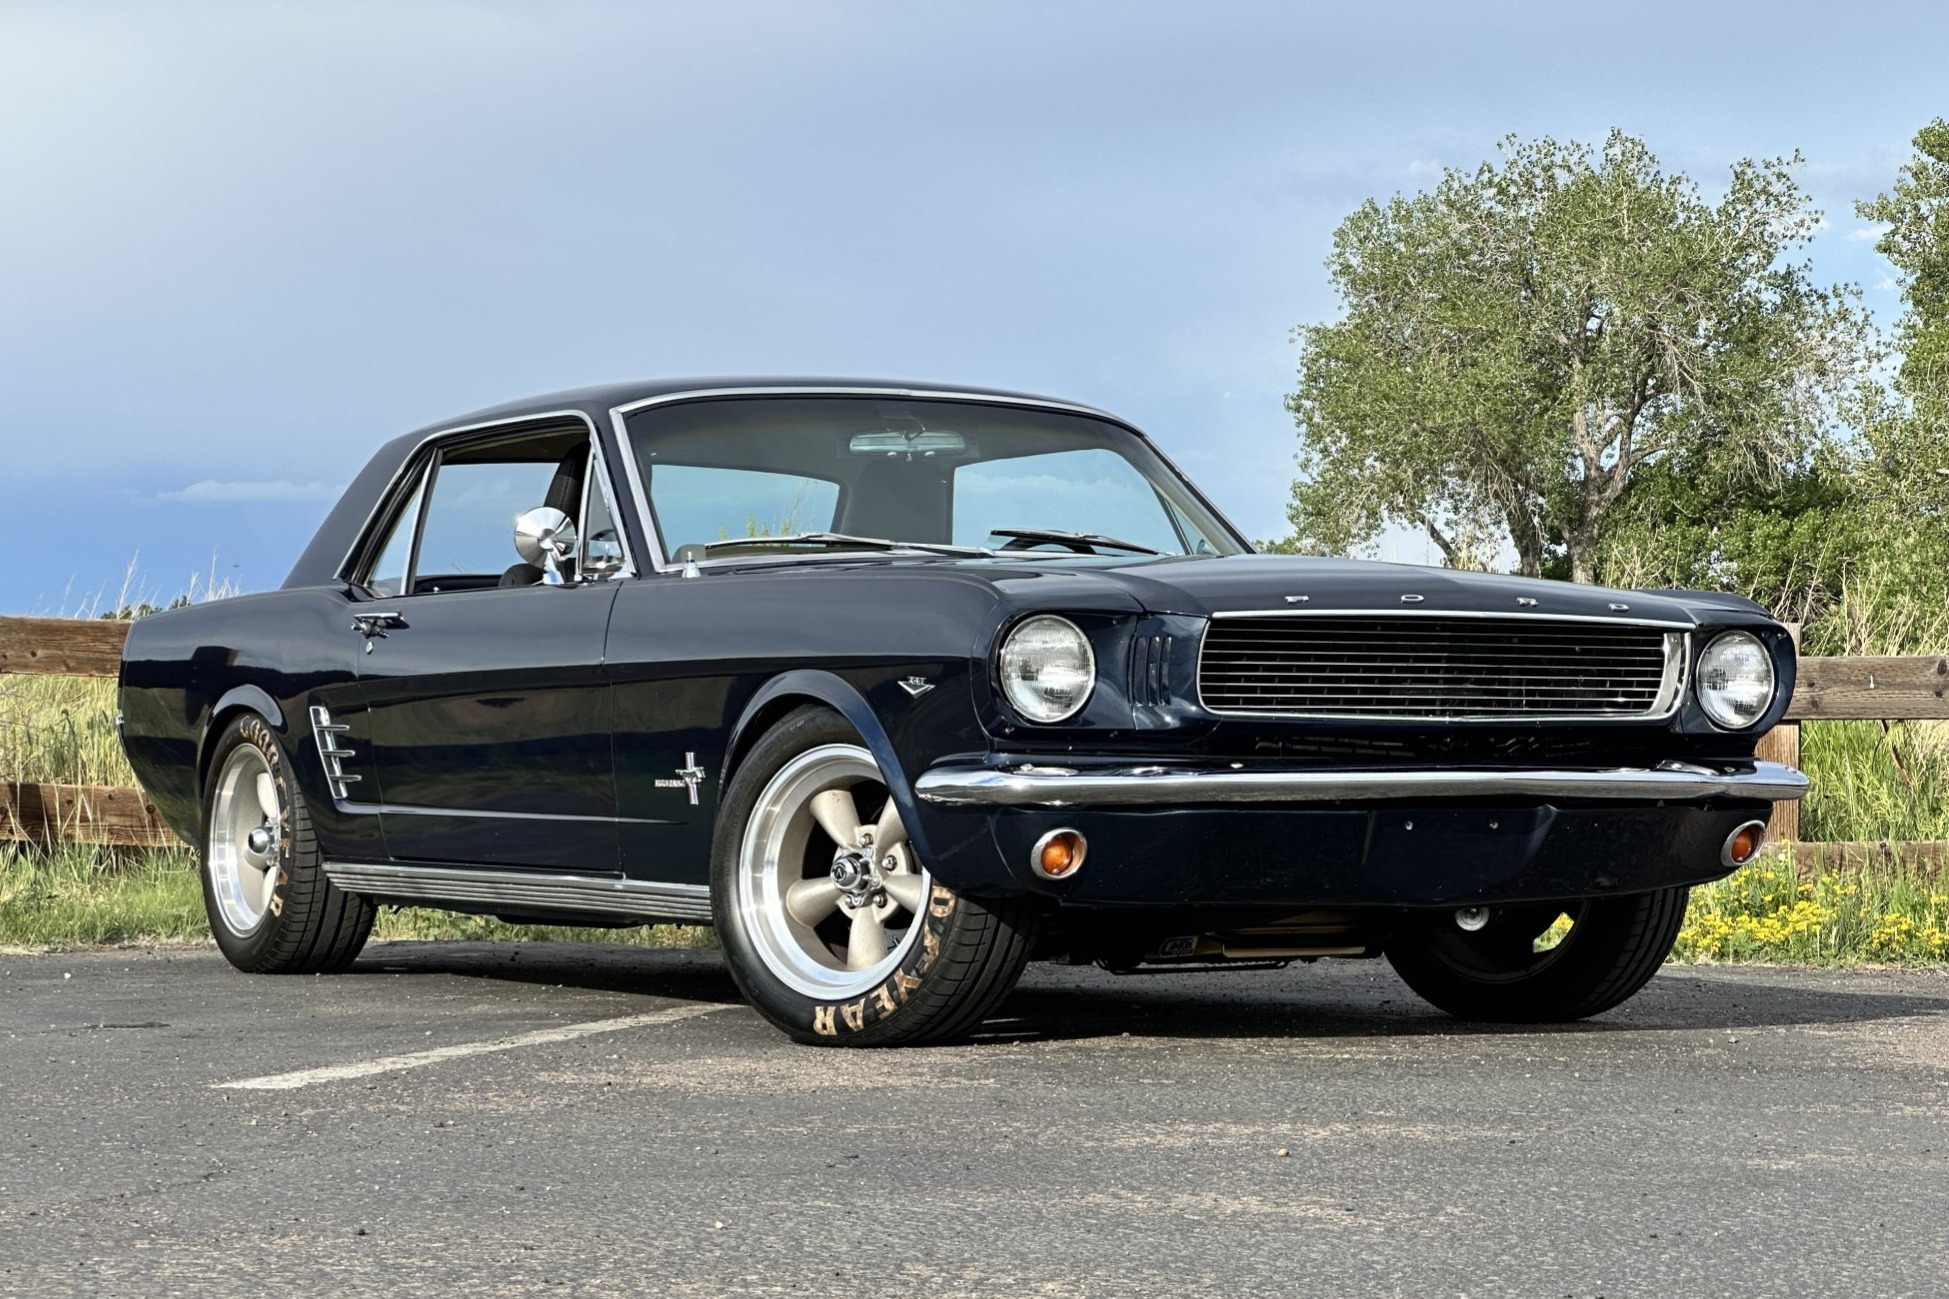 Used 347-Powered 1966 Ford Mustang Coupe 5-Speed Review